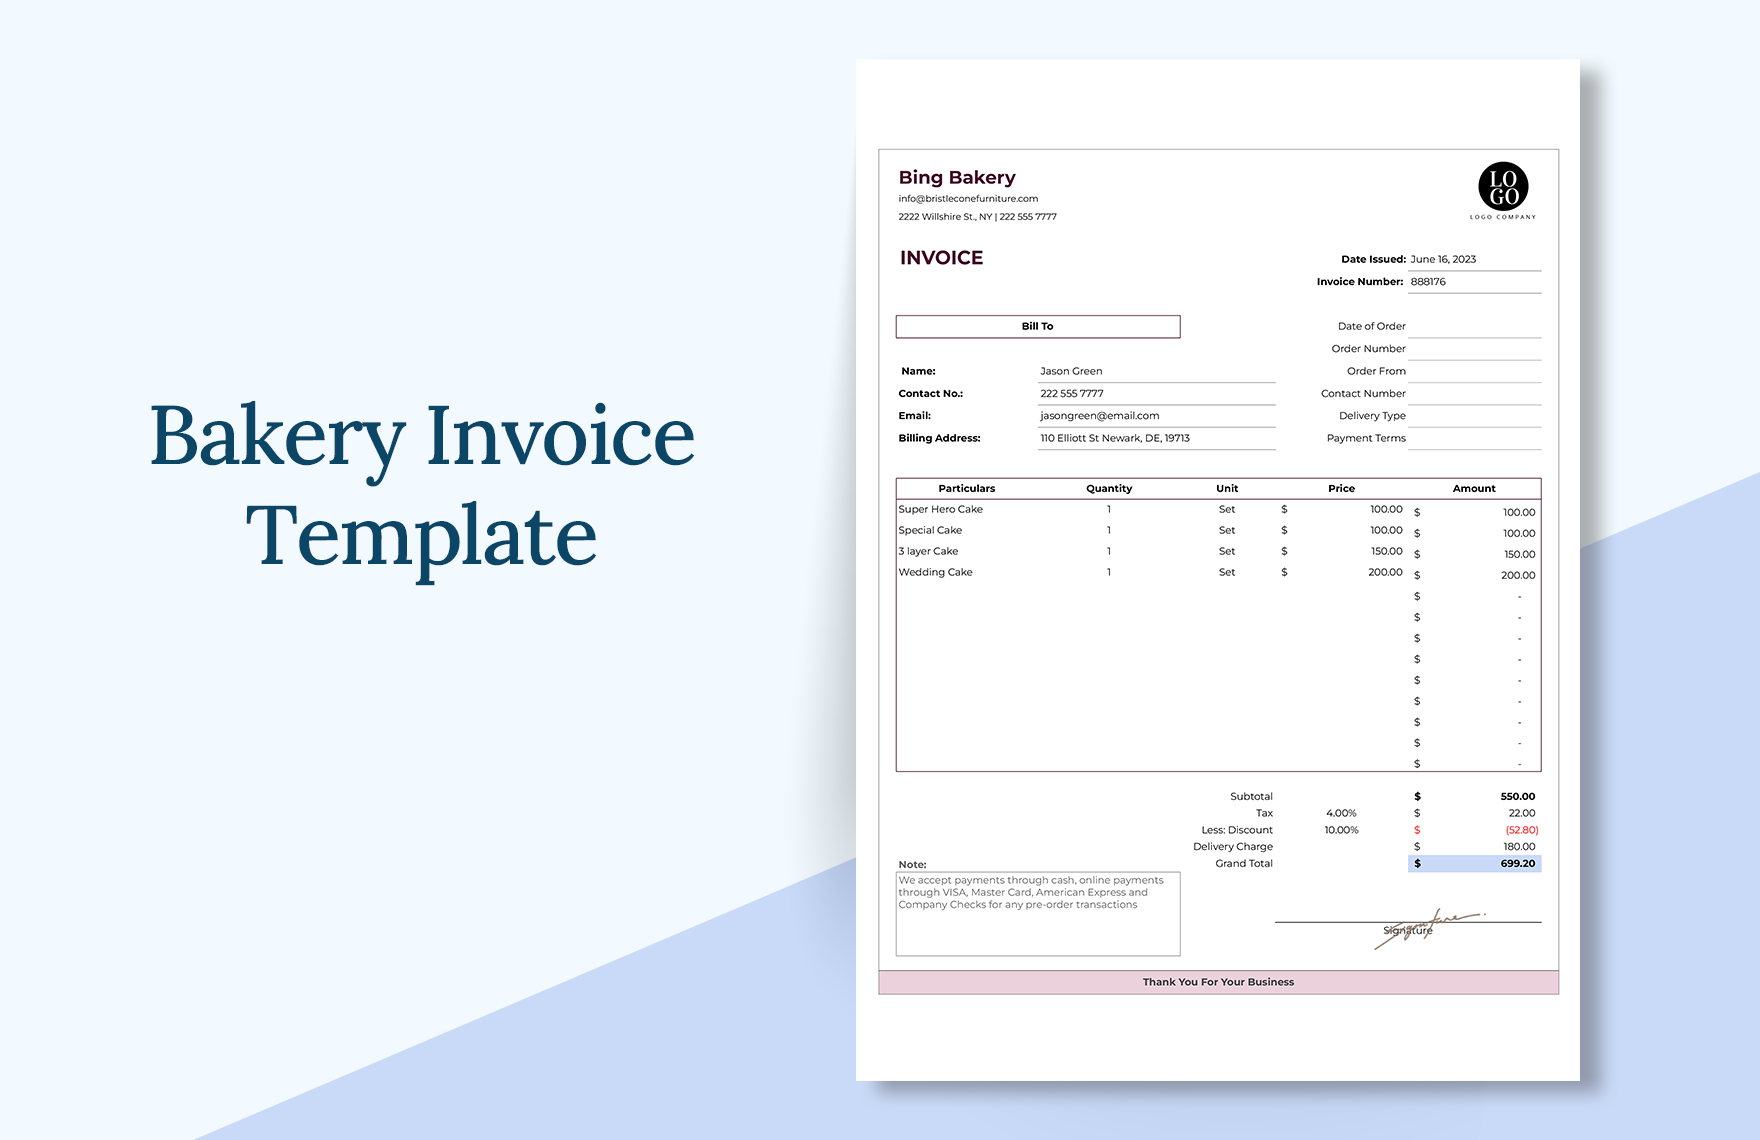 Bakery Invoice Template Download in Word, Google Docs, Excel, Google